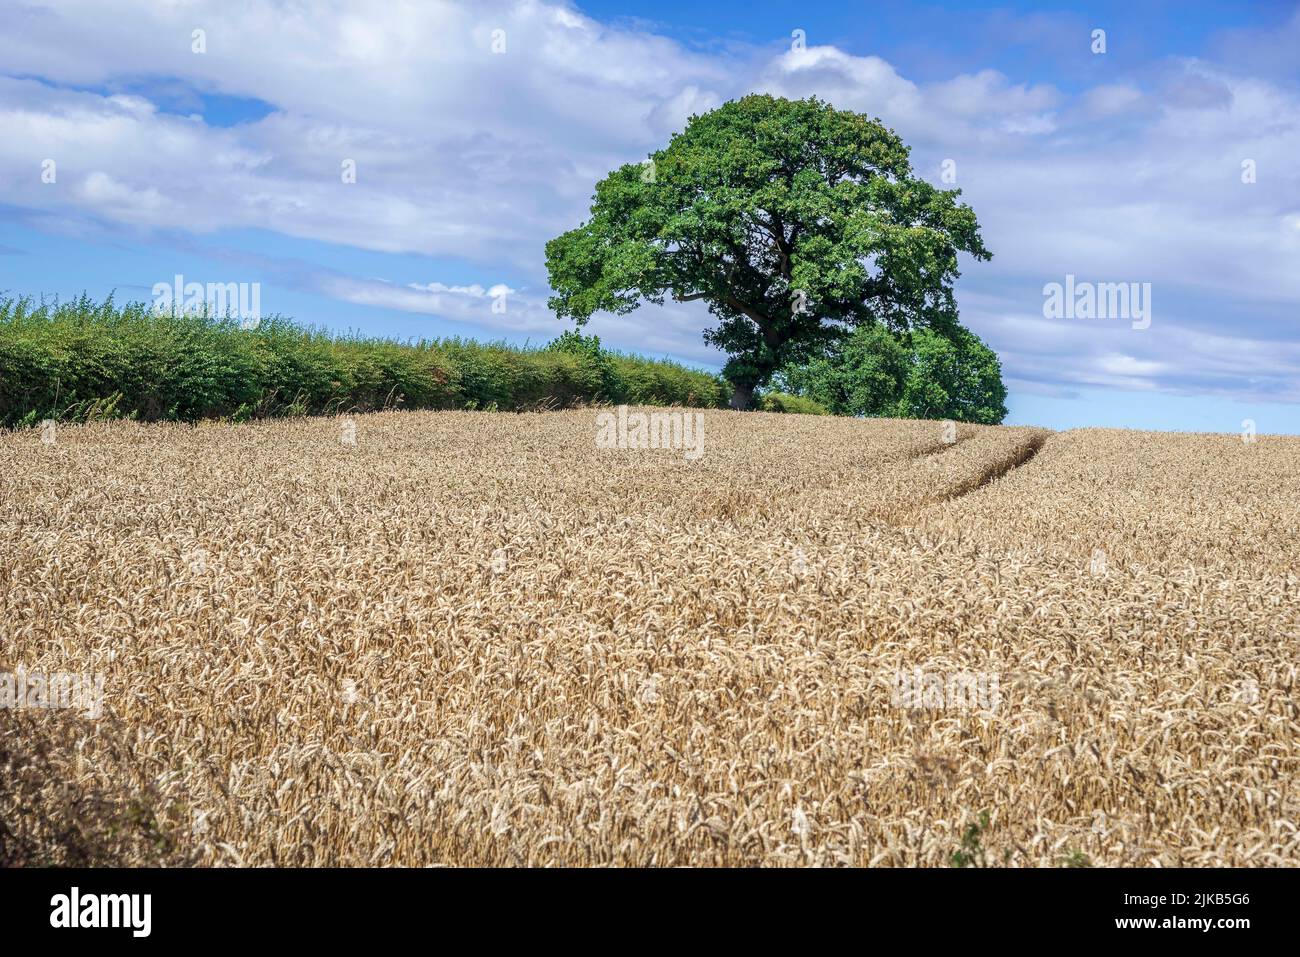 Summer wheat ready for harvesting, Stock Photo